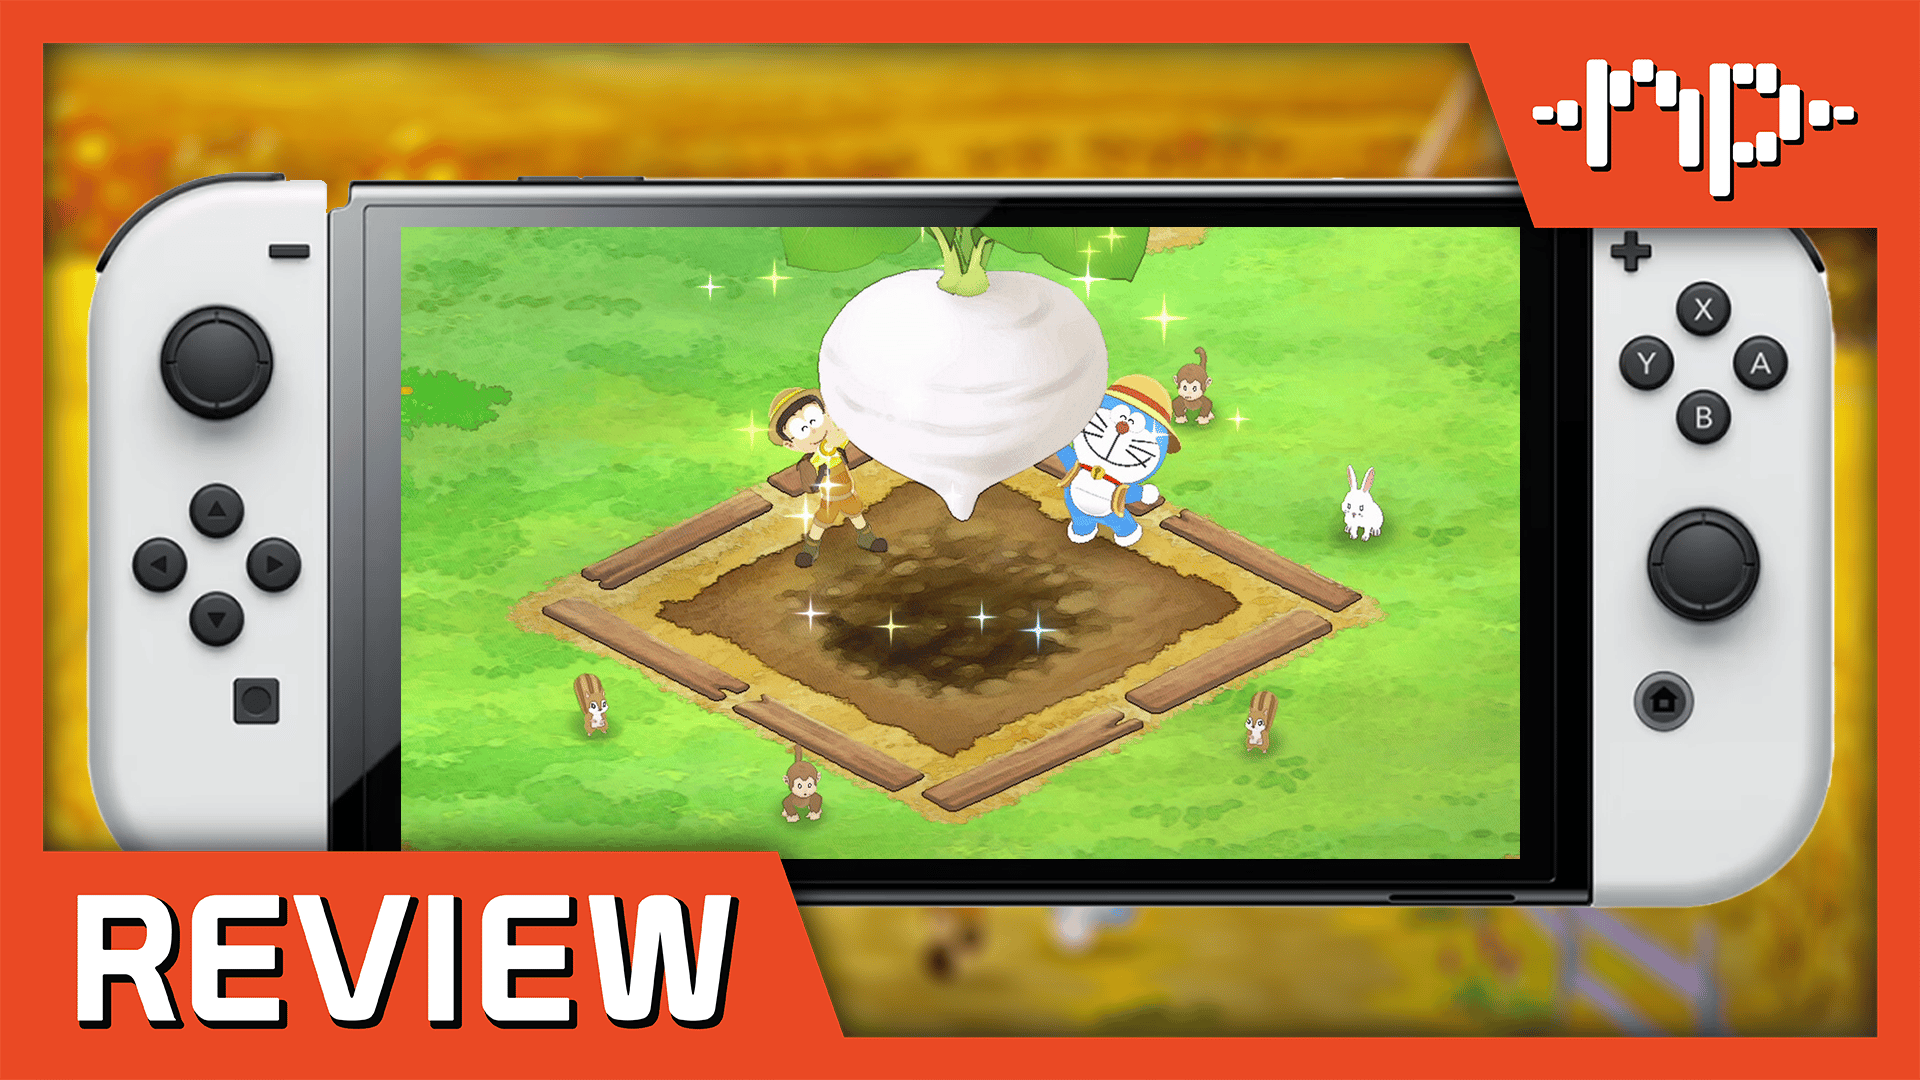 Doraemon Story of Seasons: Friends of the Great Kingdom Review – The Return of the Cute Doraemon